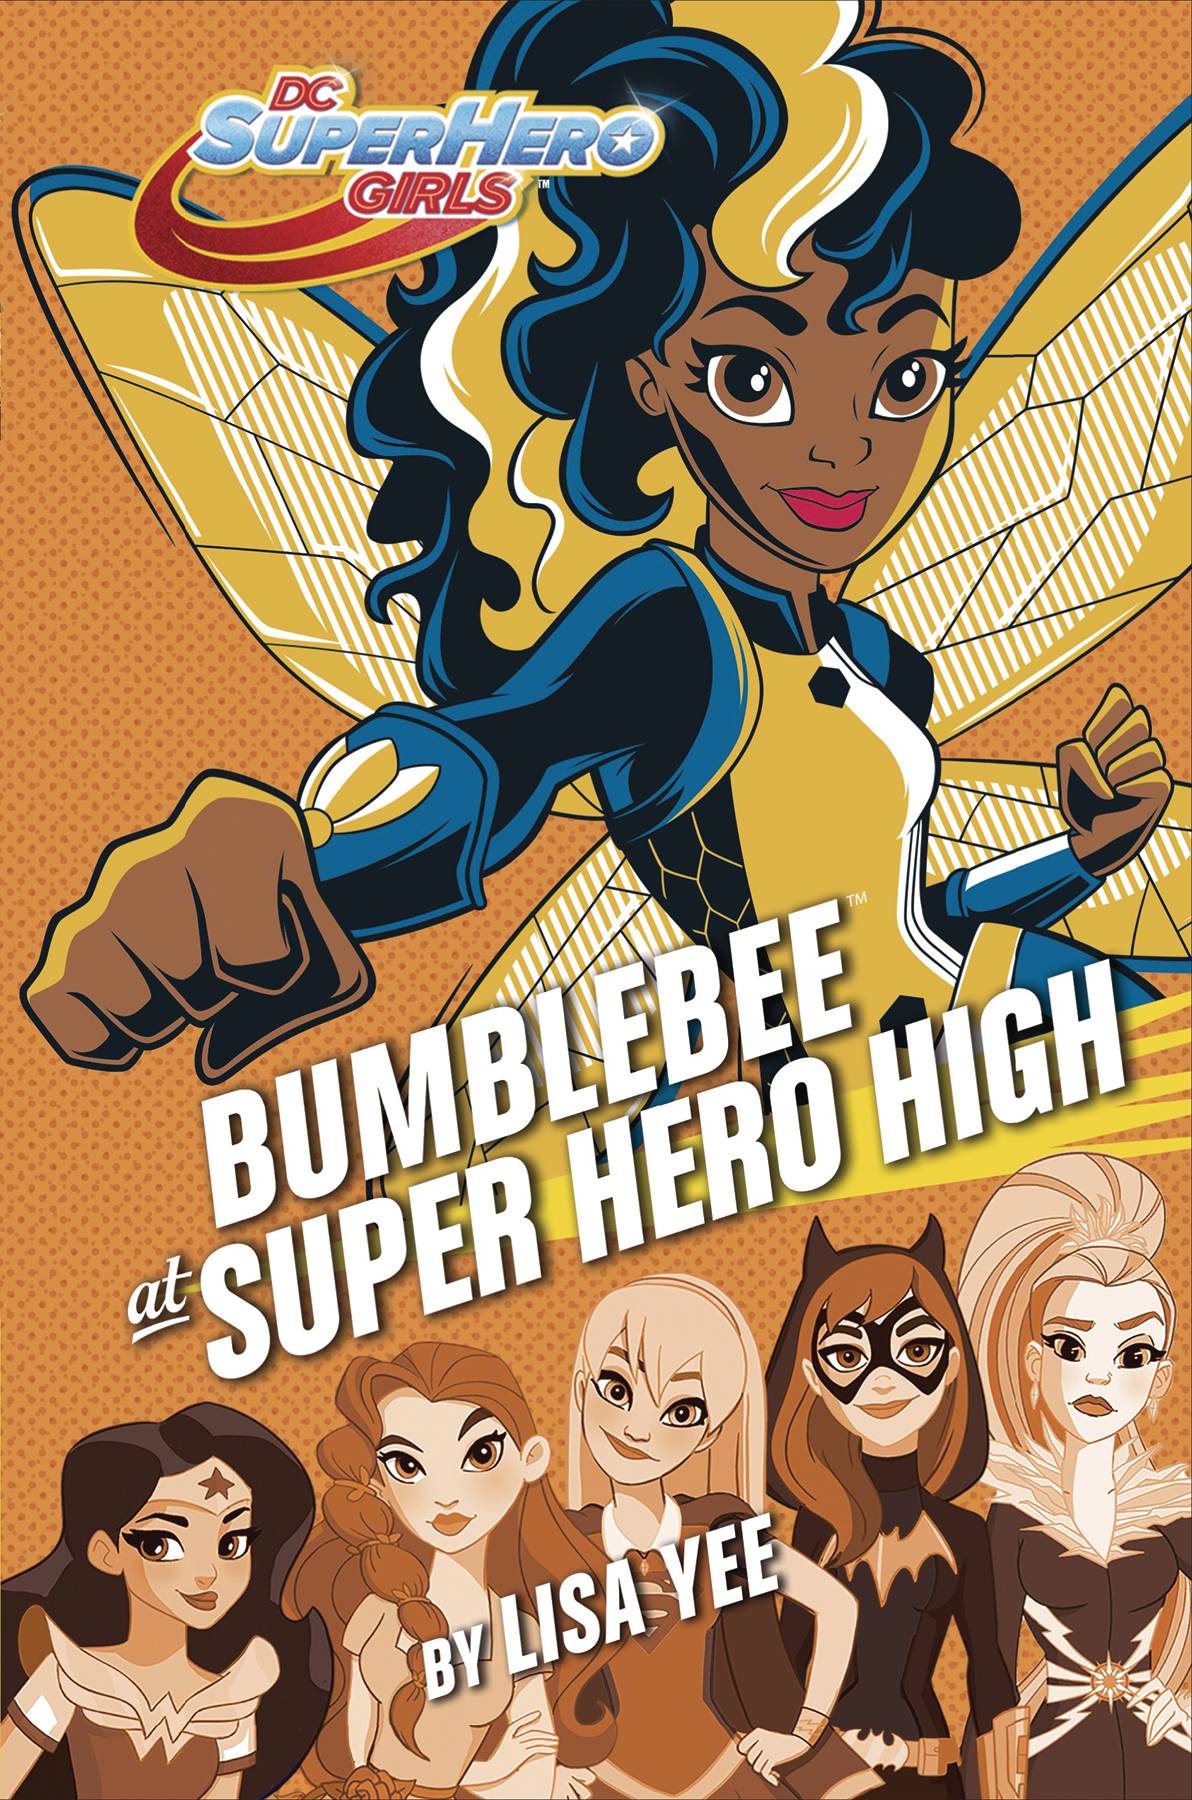 DC Super Hero Girls Young Reader Hardcover Volume 6 Bumble Bee At Super Hero High